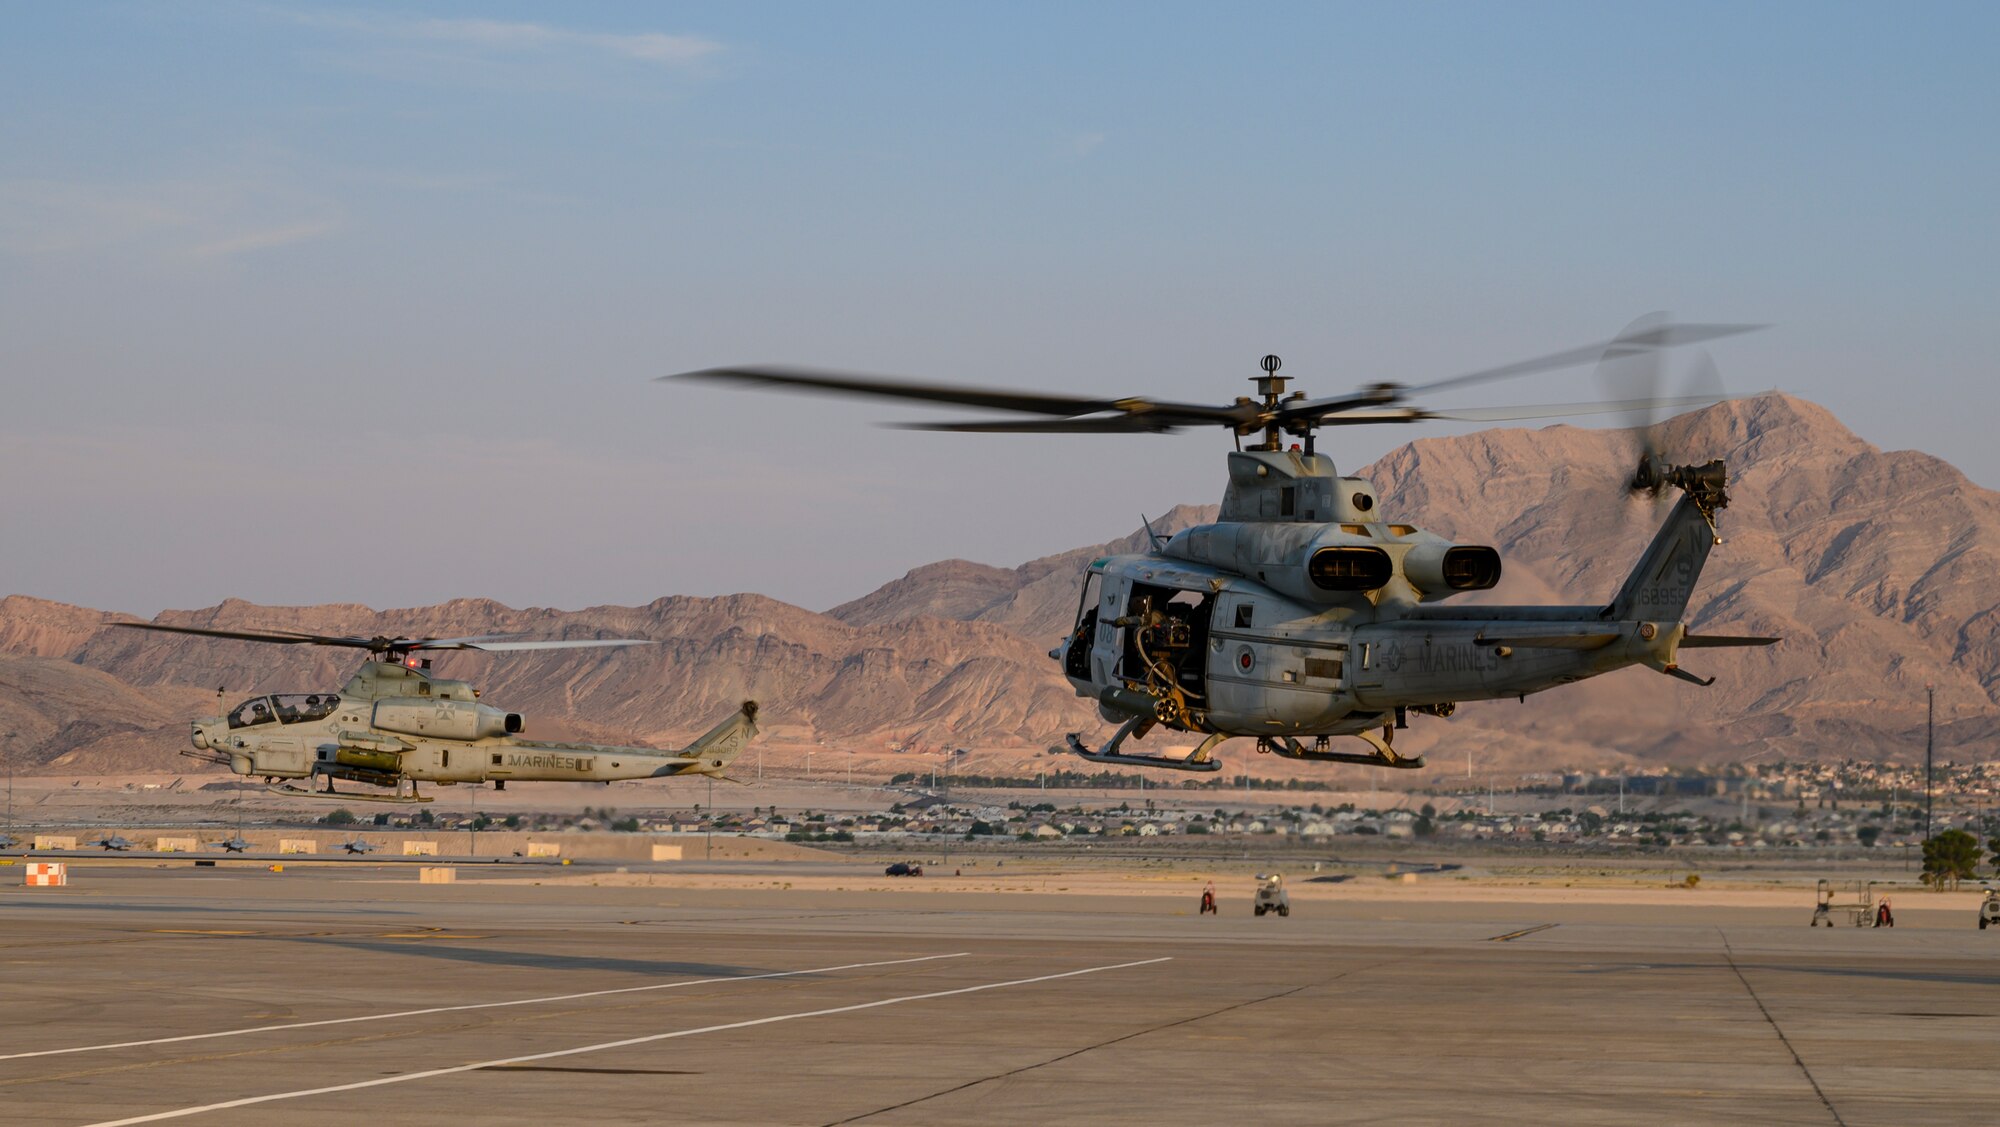 Helicopters take off from the flight line.